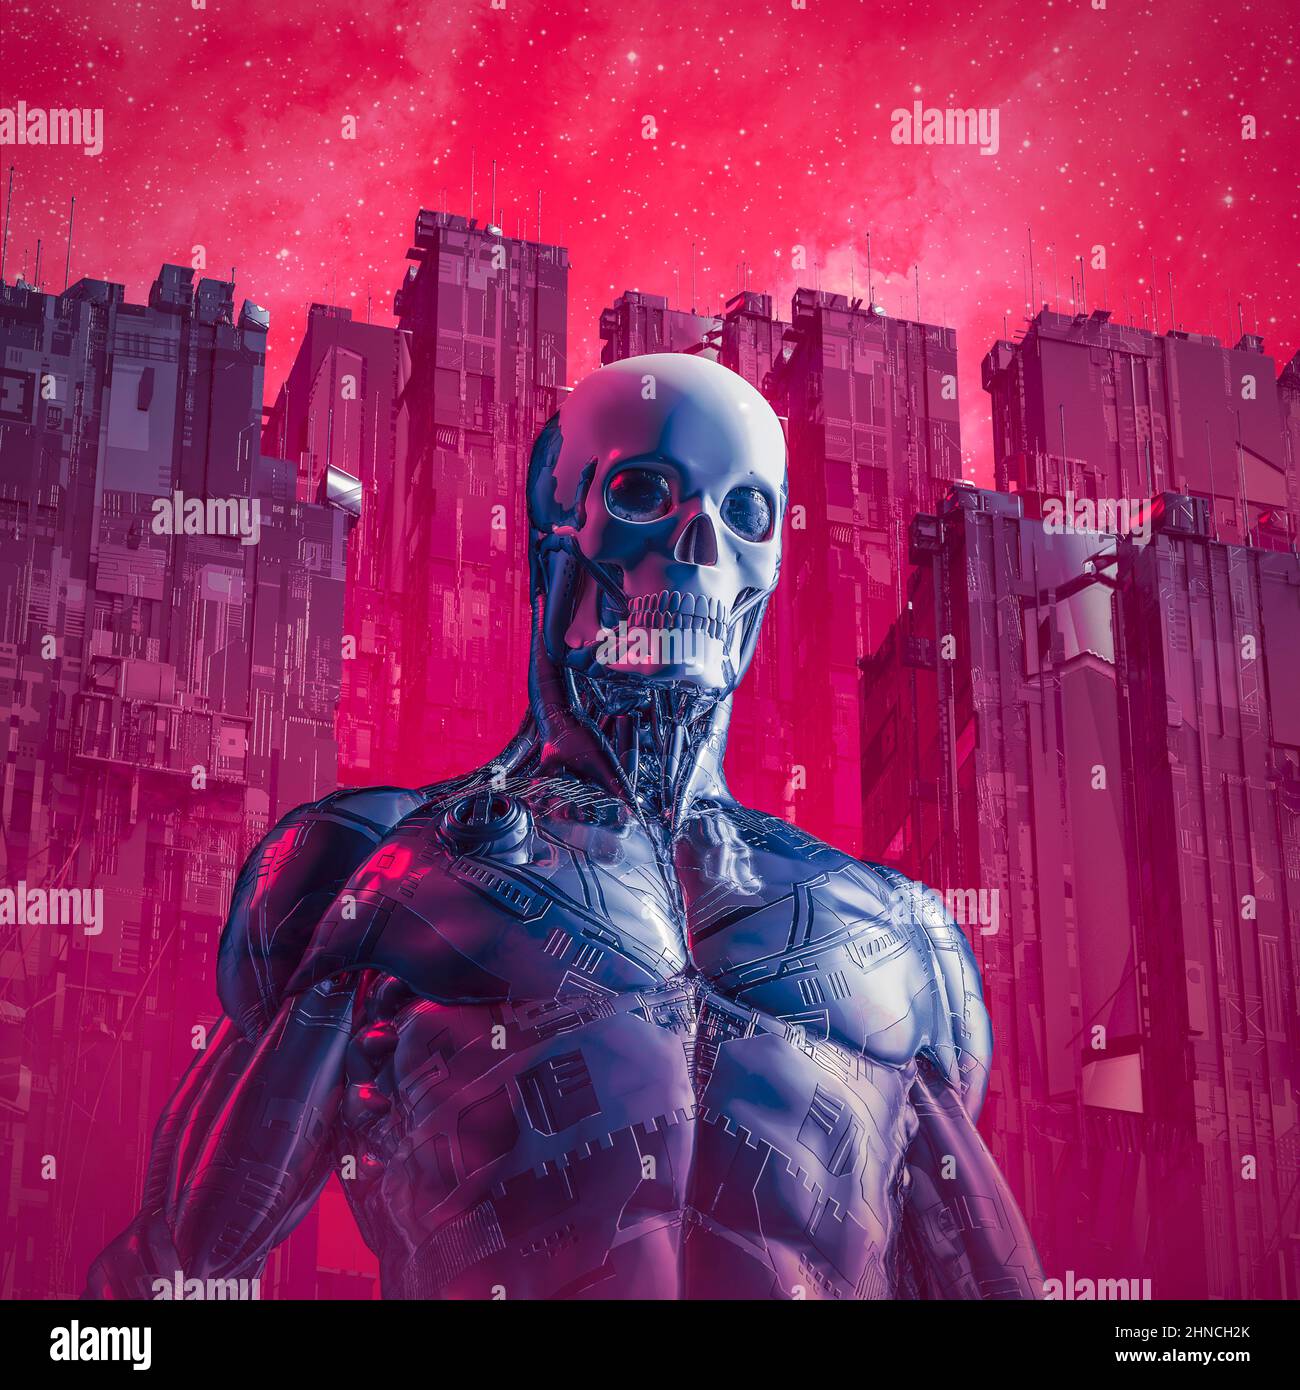 Cyberpunk death cyborg - 3D illustration of male science fiction skull faced robot in futuristic city Stock Photo